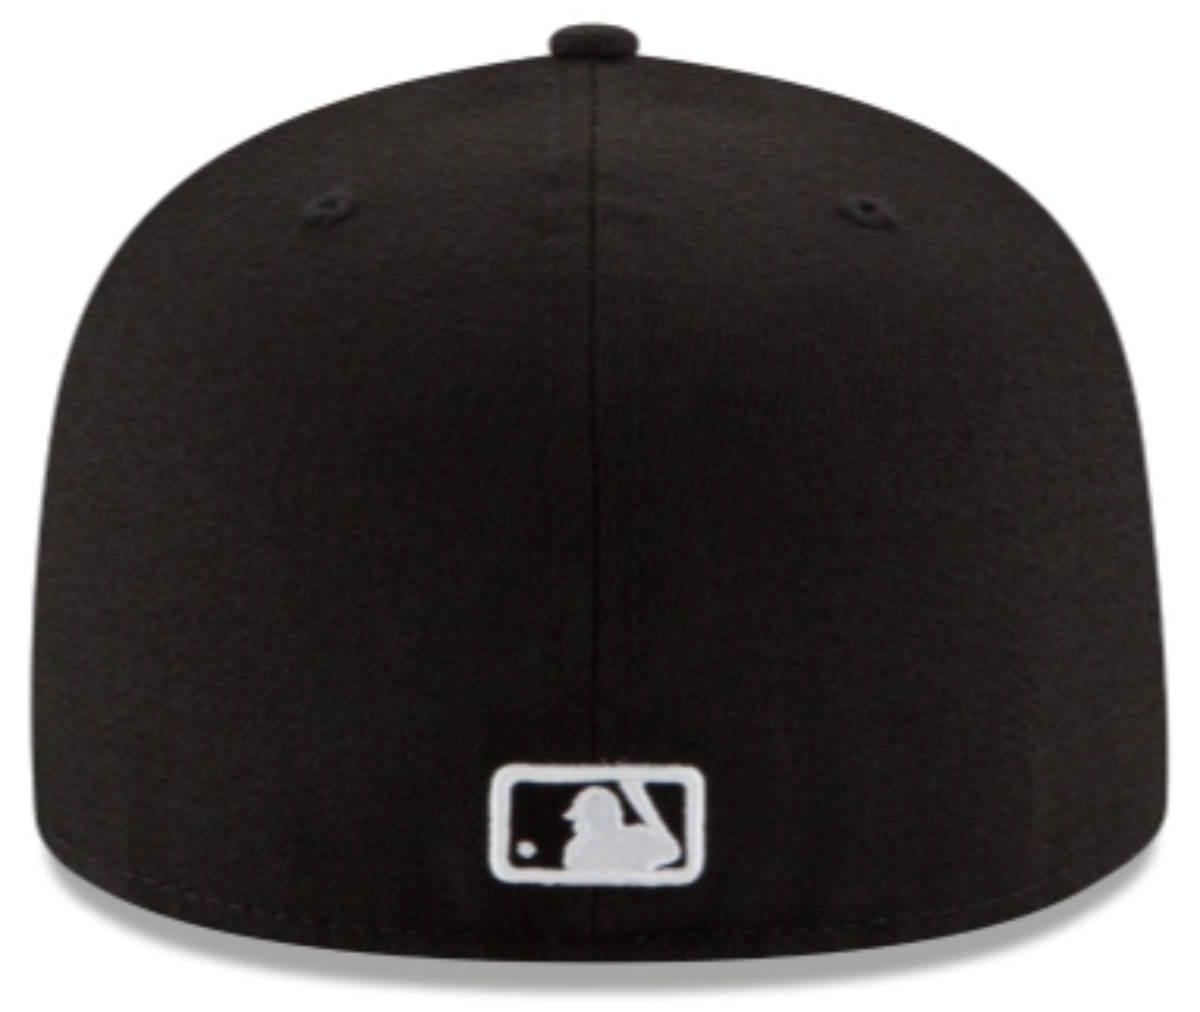 Los Angeles Dodgers Black On White 59Fifty Fitted nvsoccer.com The Coliseum